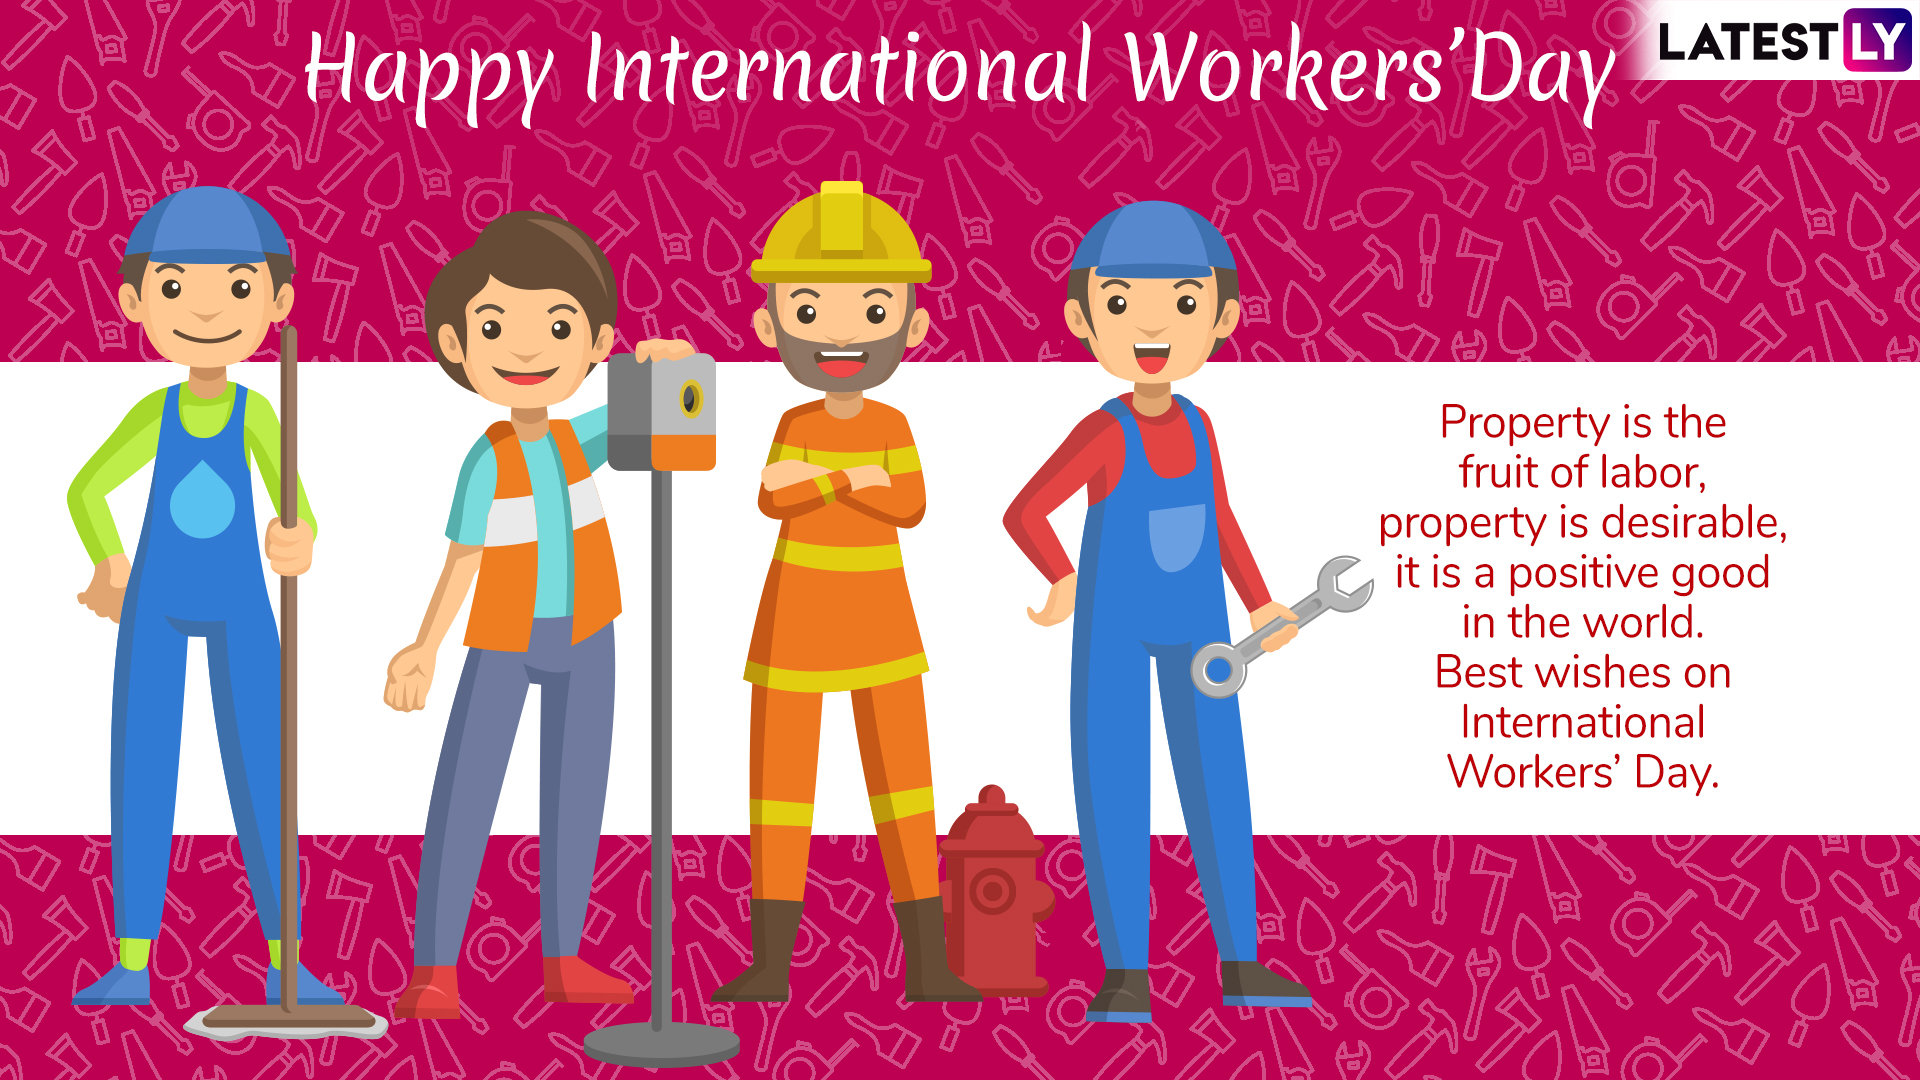 Page 22  25,000+ Happy Workers Day Pictures